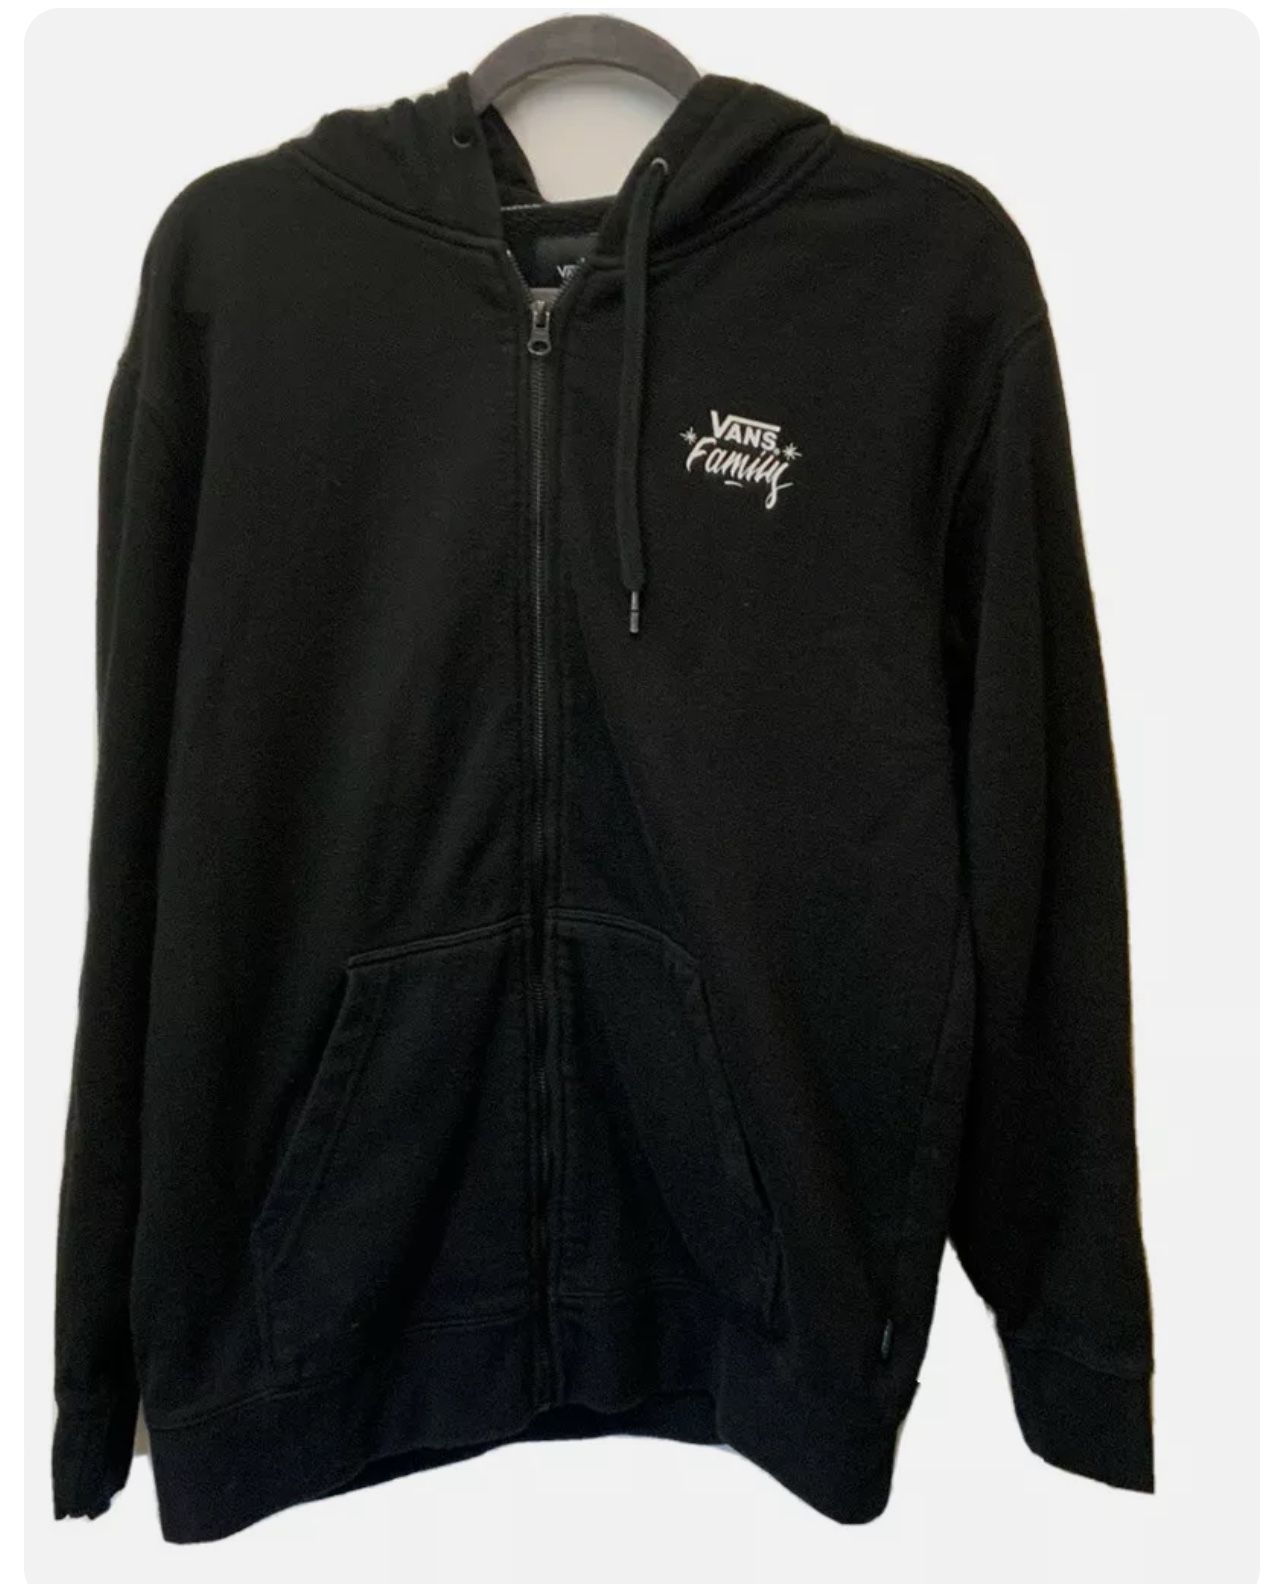 New With Tags Vans Family Zipper Hoodie